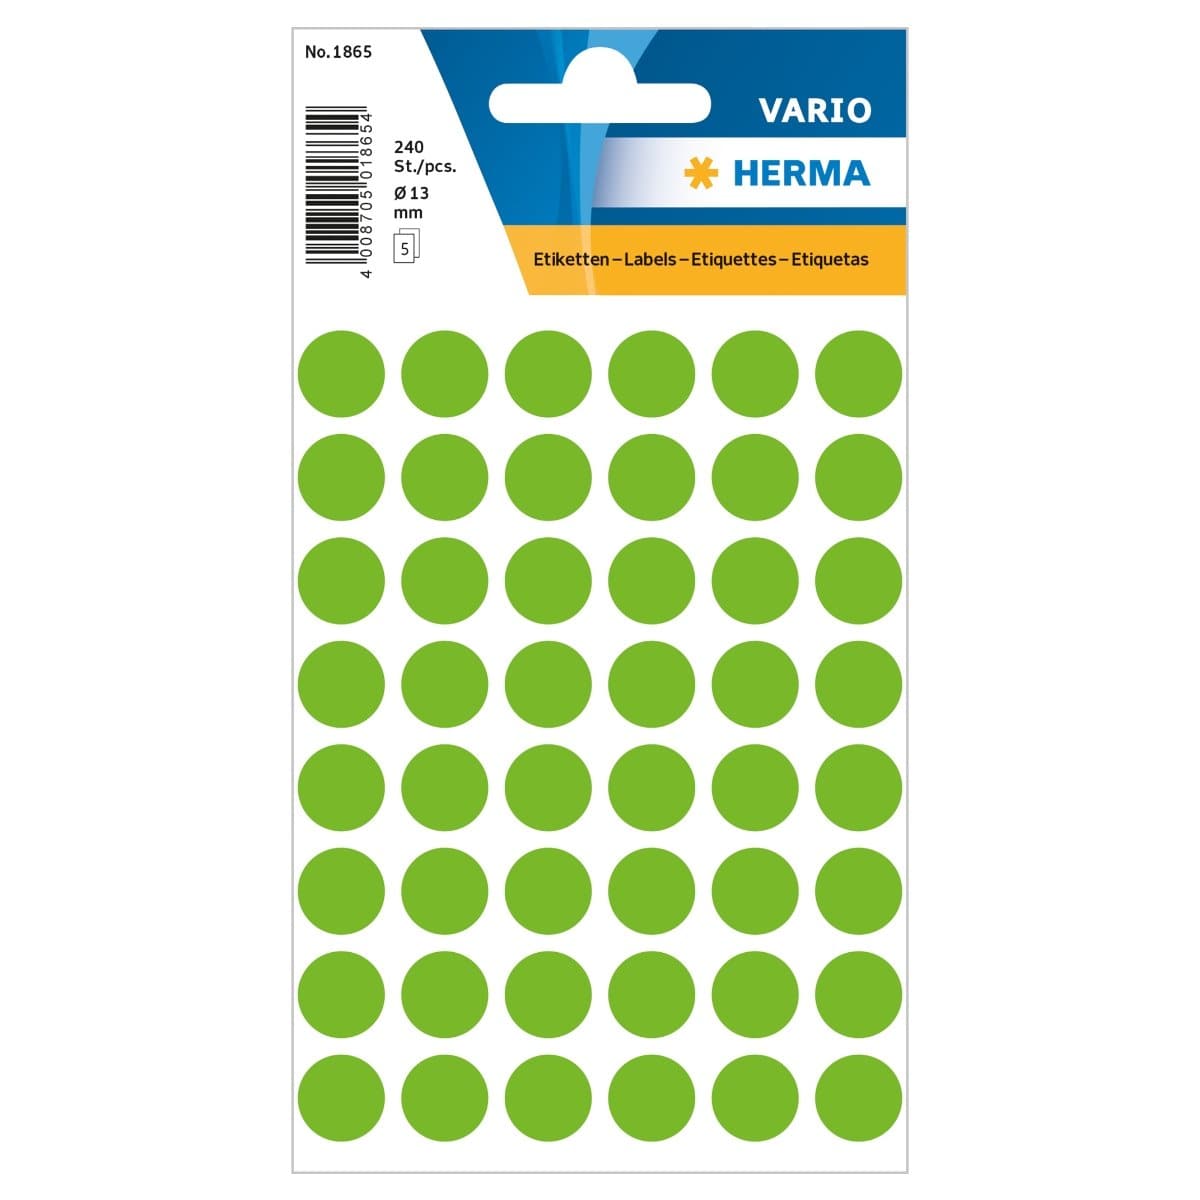 Herma Vario Sticker Color Dots, 13 mm, 240/pack, Green